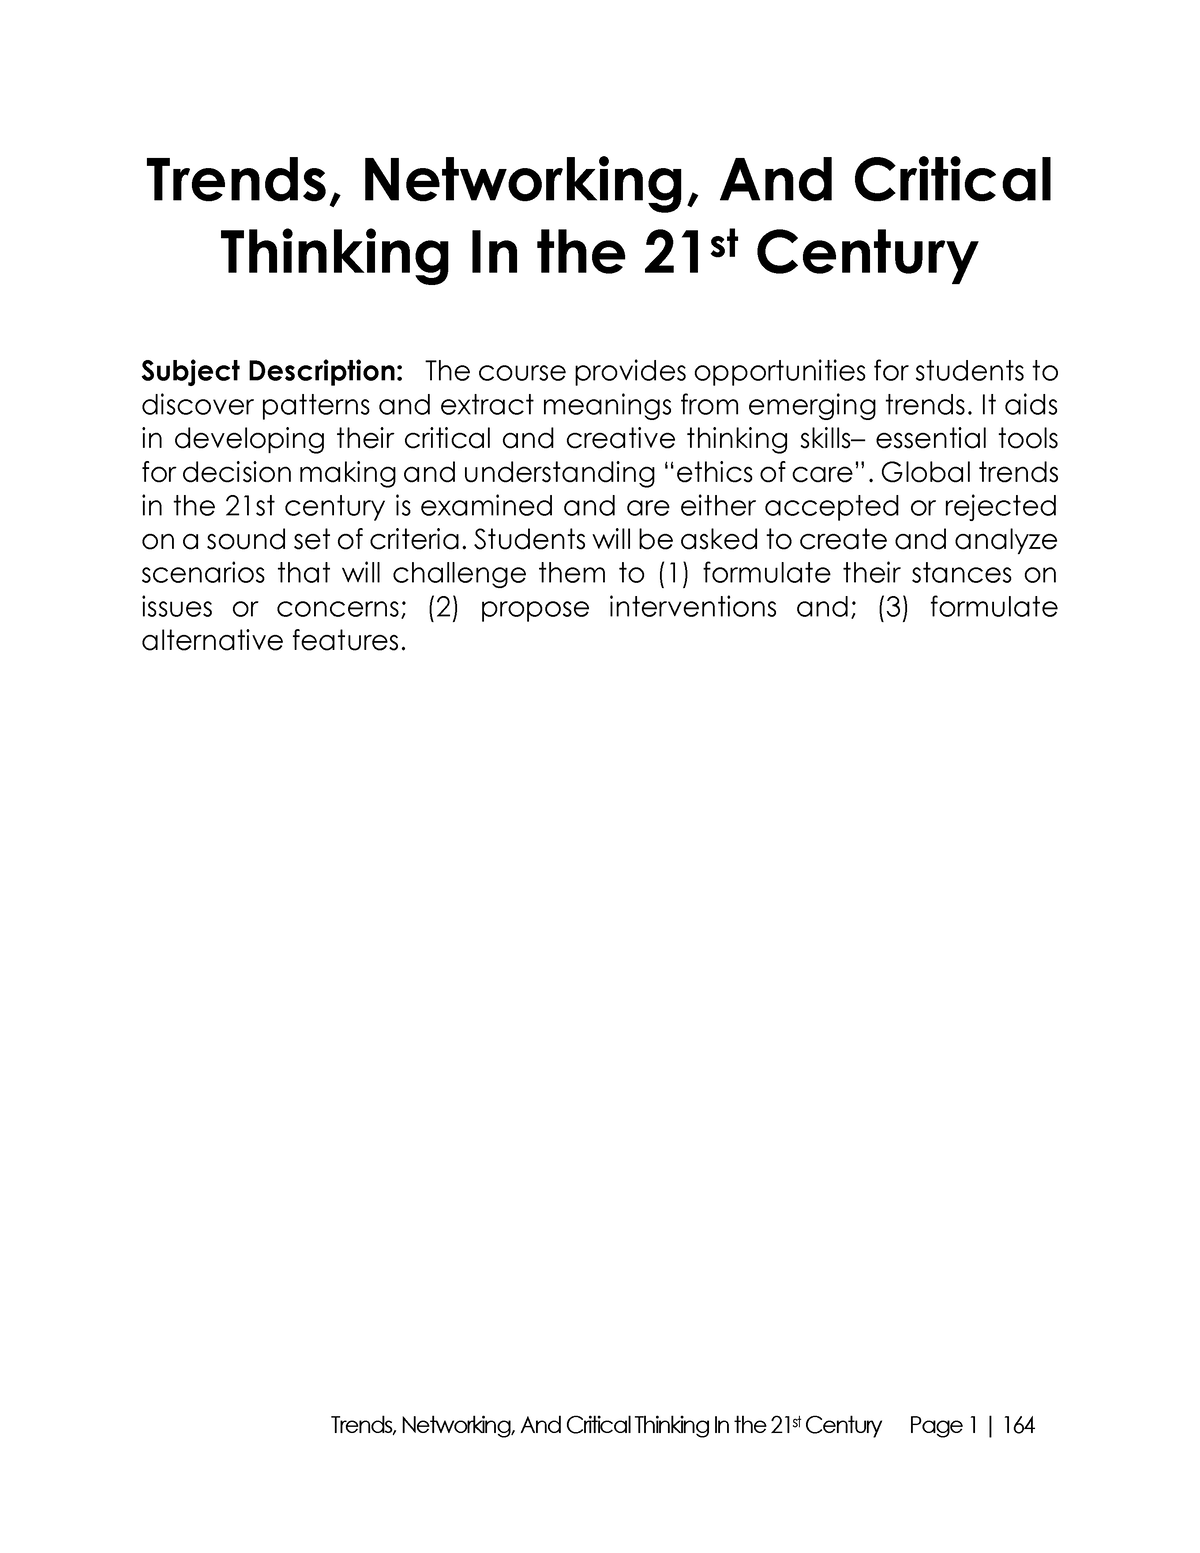 trends network and critical thinking in 21st century culture